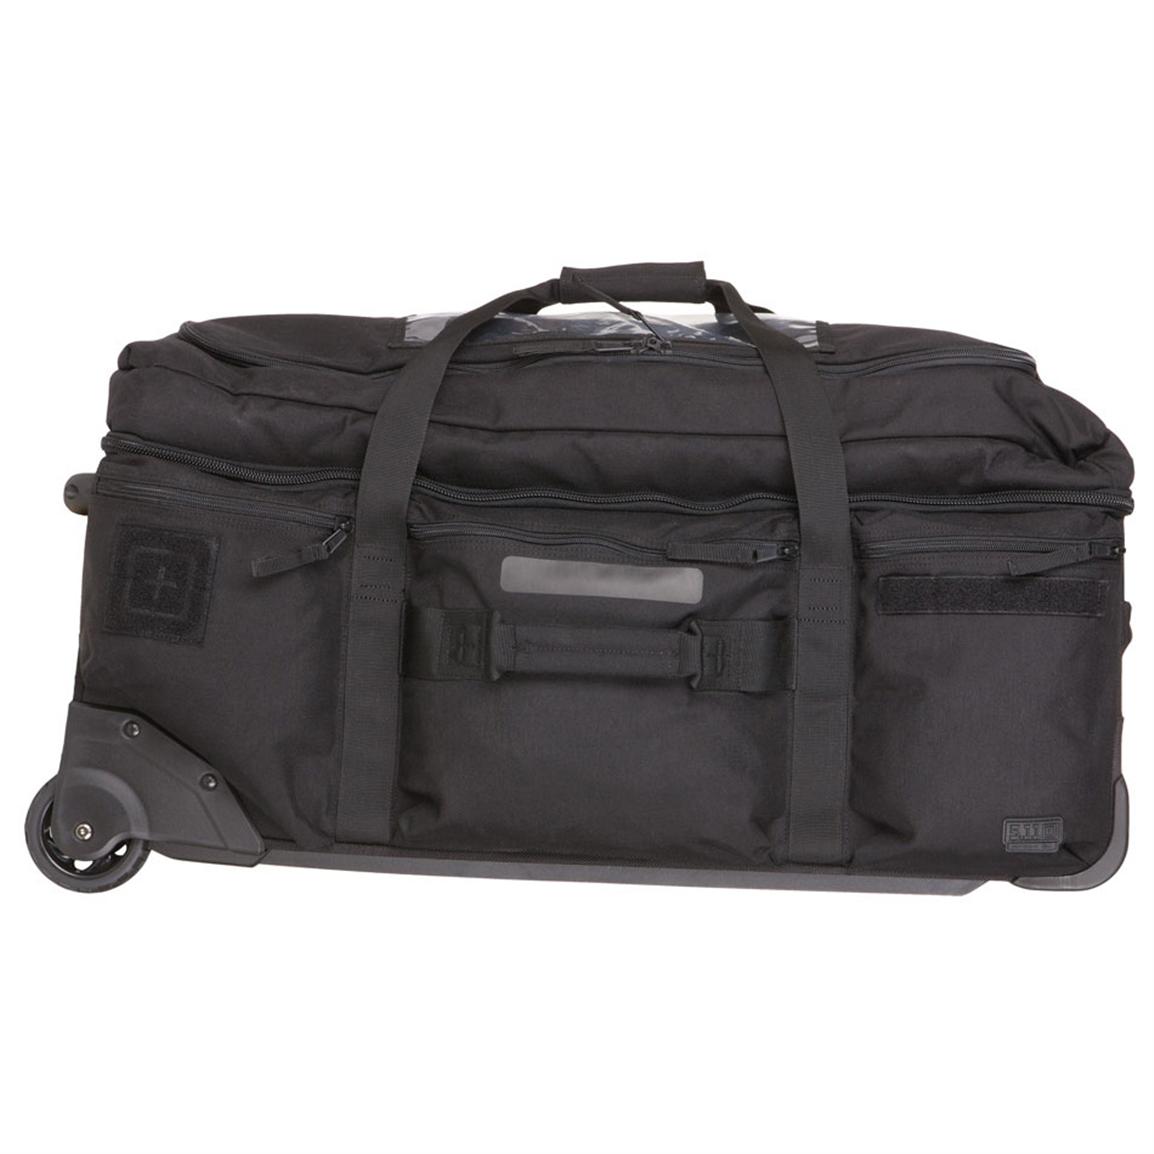 5.11 Tactical® Mission Ready 2.0 Rolling Duffel, Black - 230453, Military Style Backpacks & Bags ...